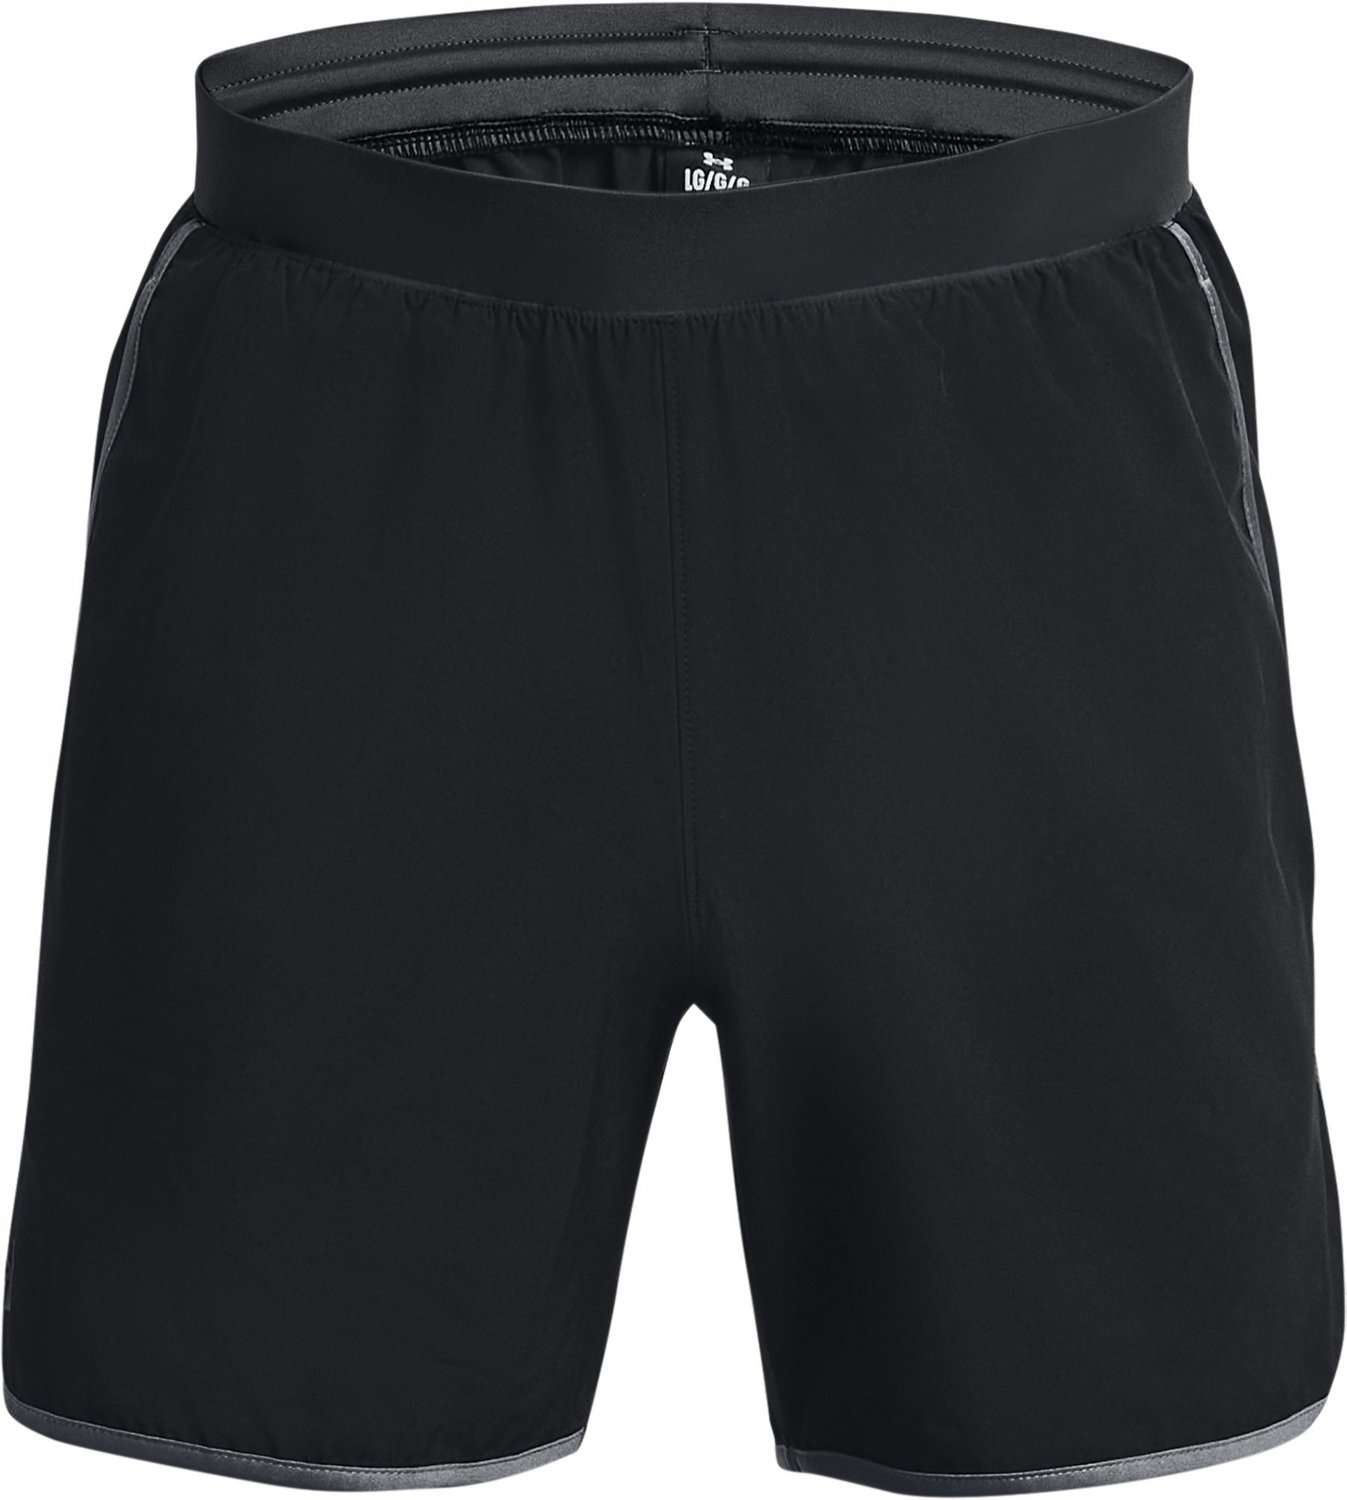 Under Armour Men's HIIT Woven Shorts 6 in